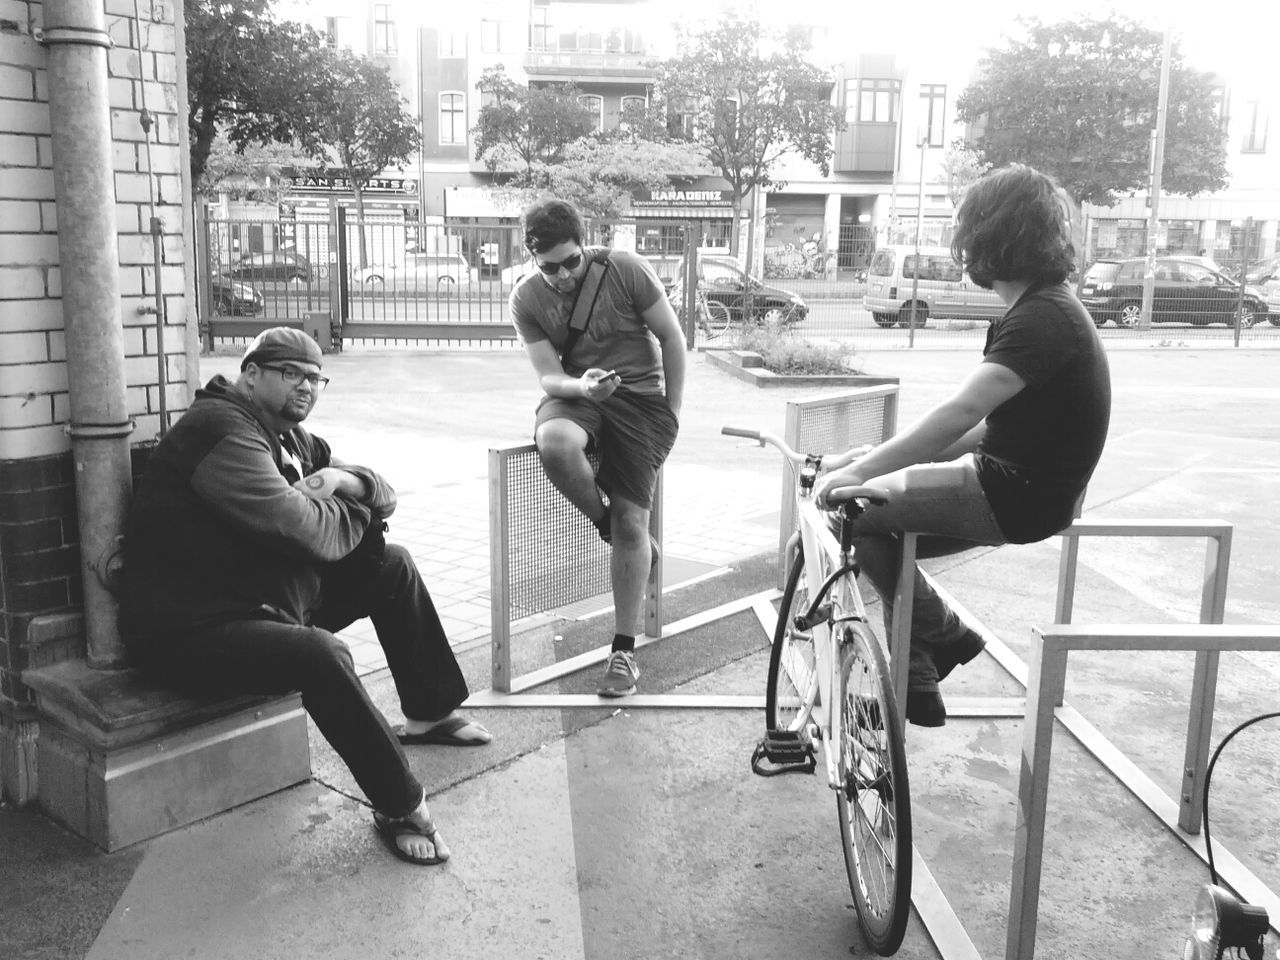 Three young men sitting outdoors